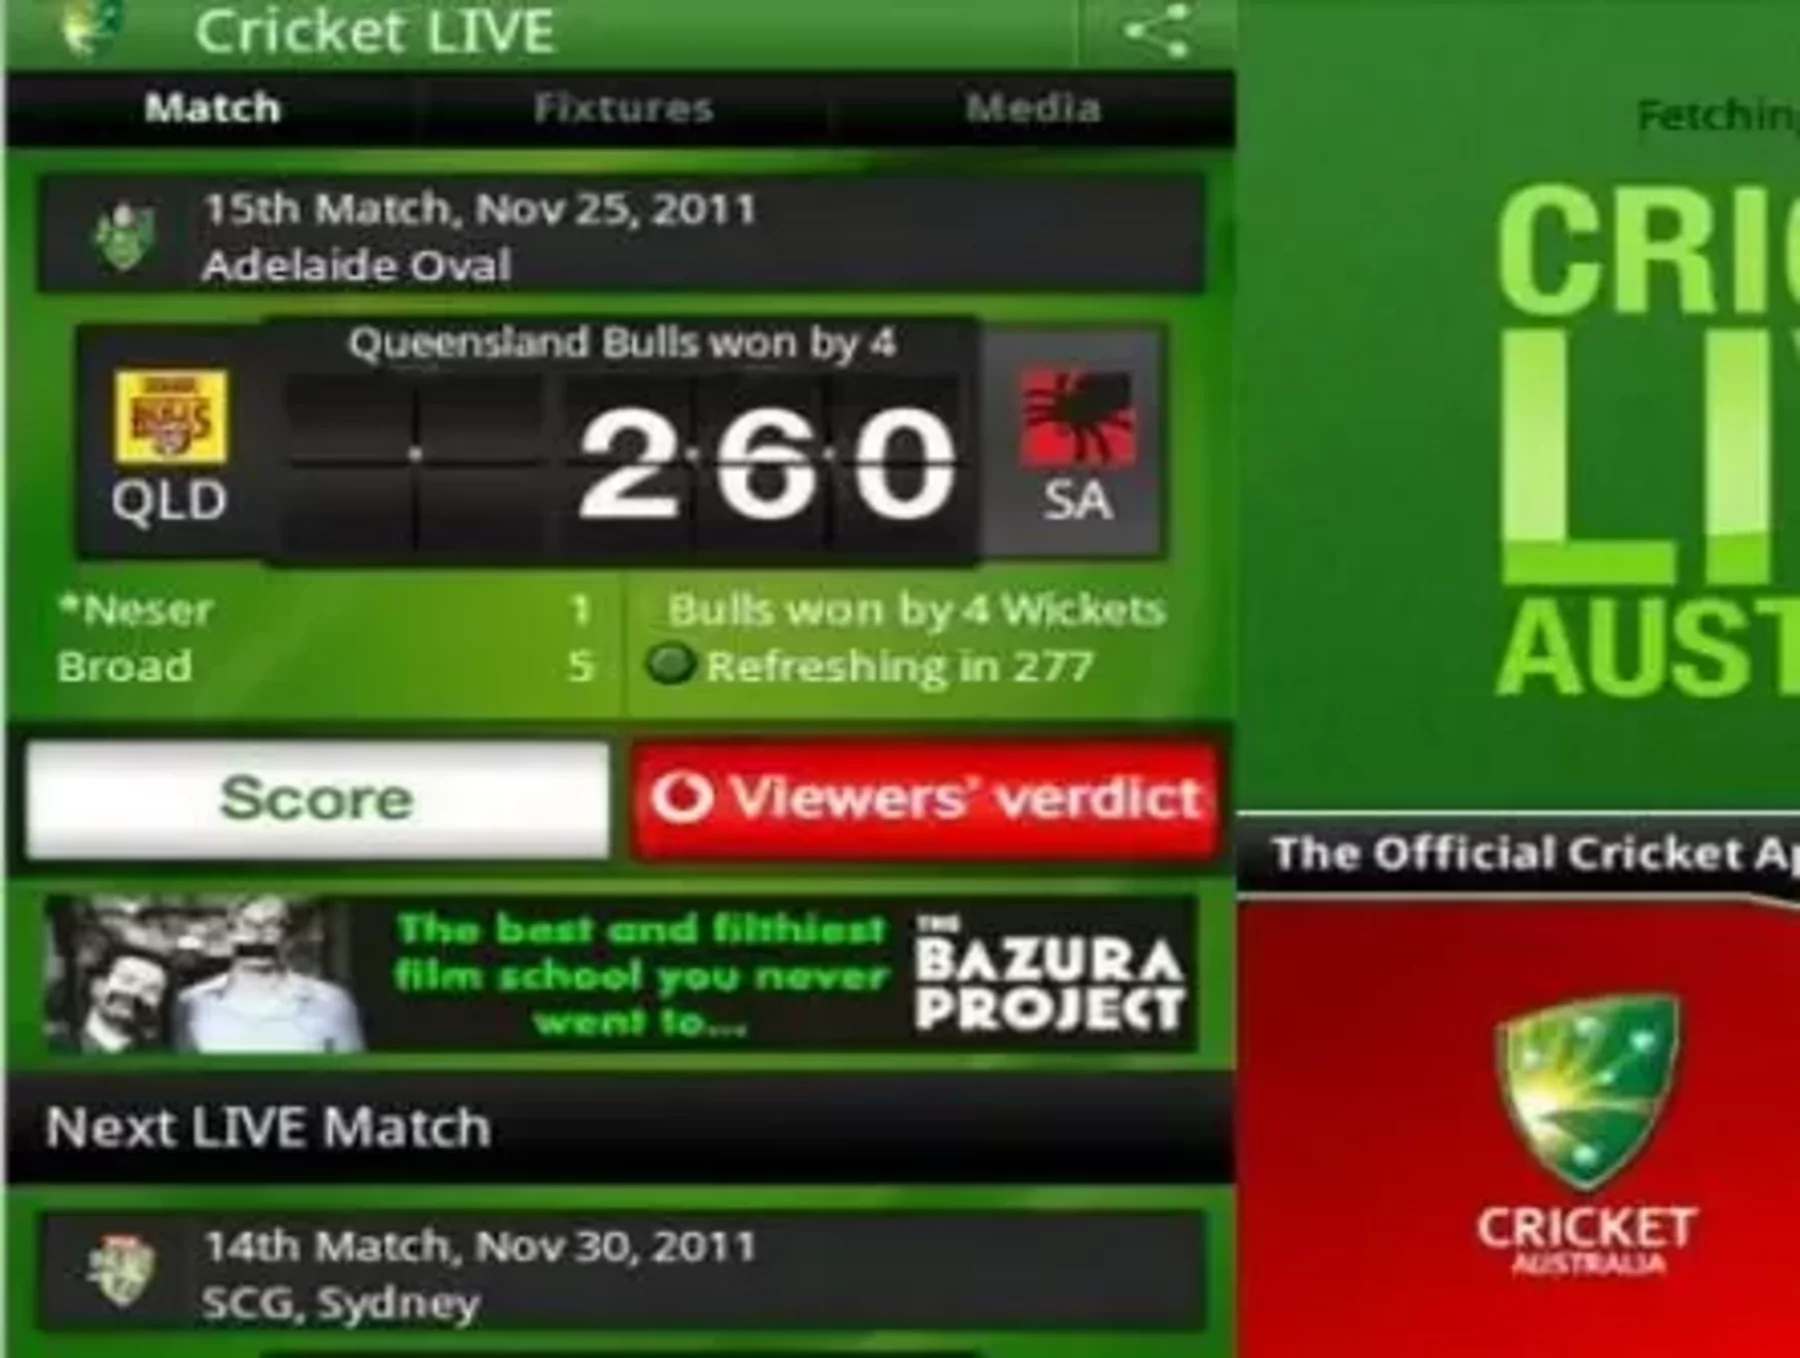 Vodafone releases Cricket LIVE app Business Chief Asia